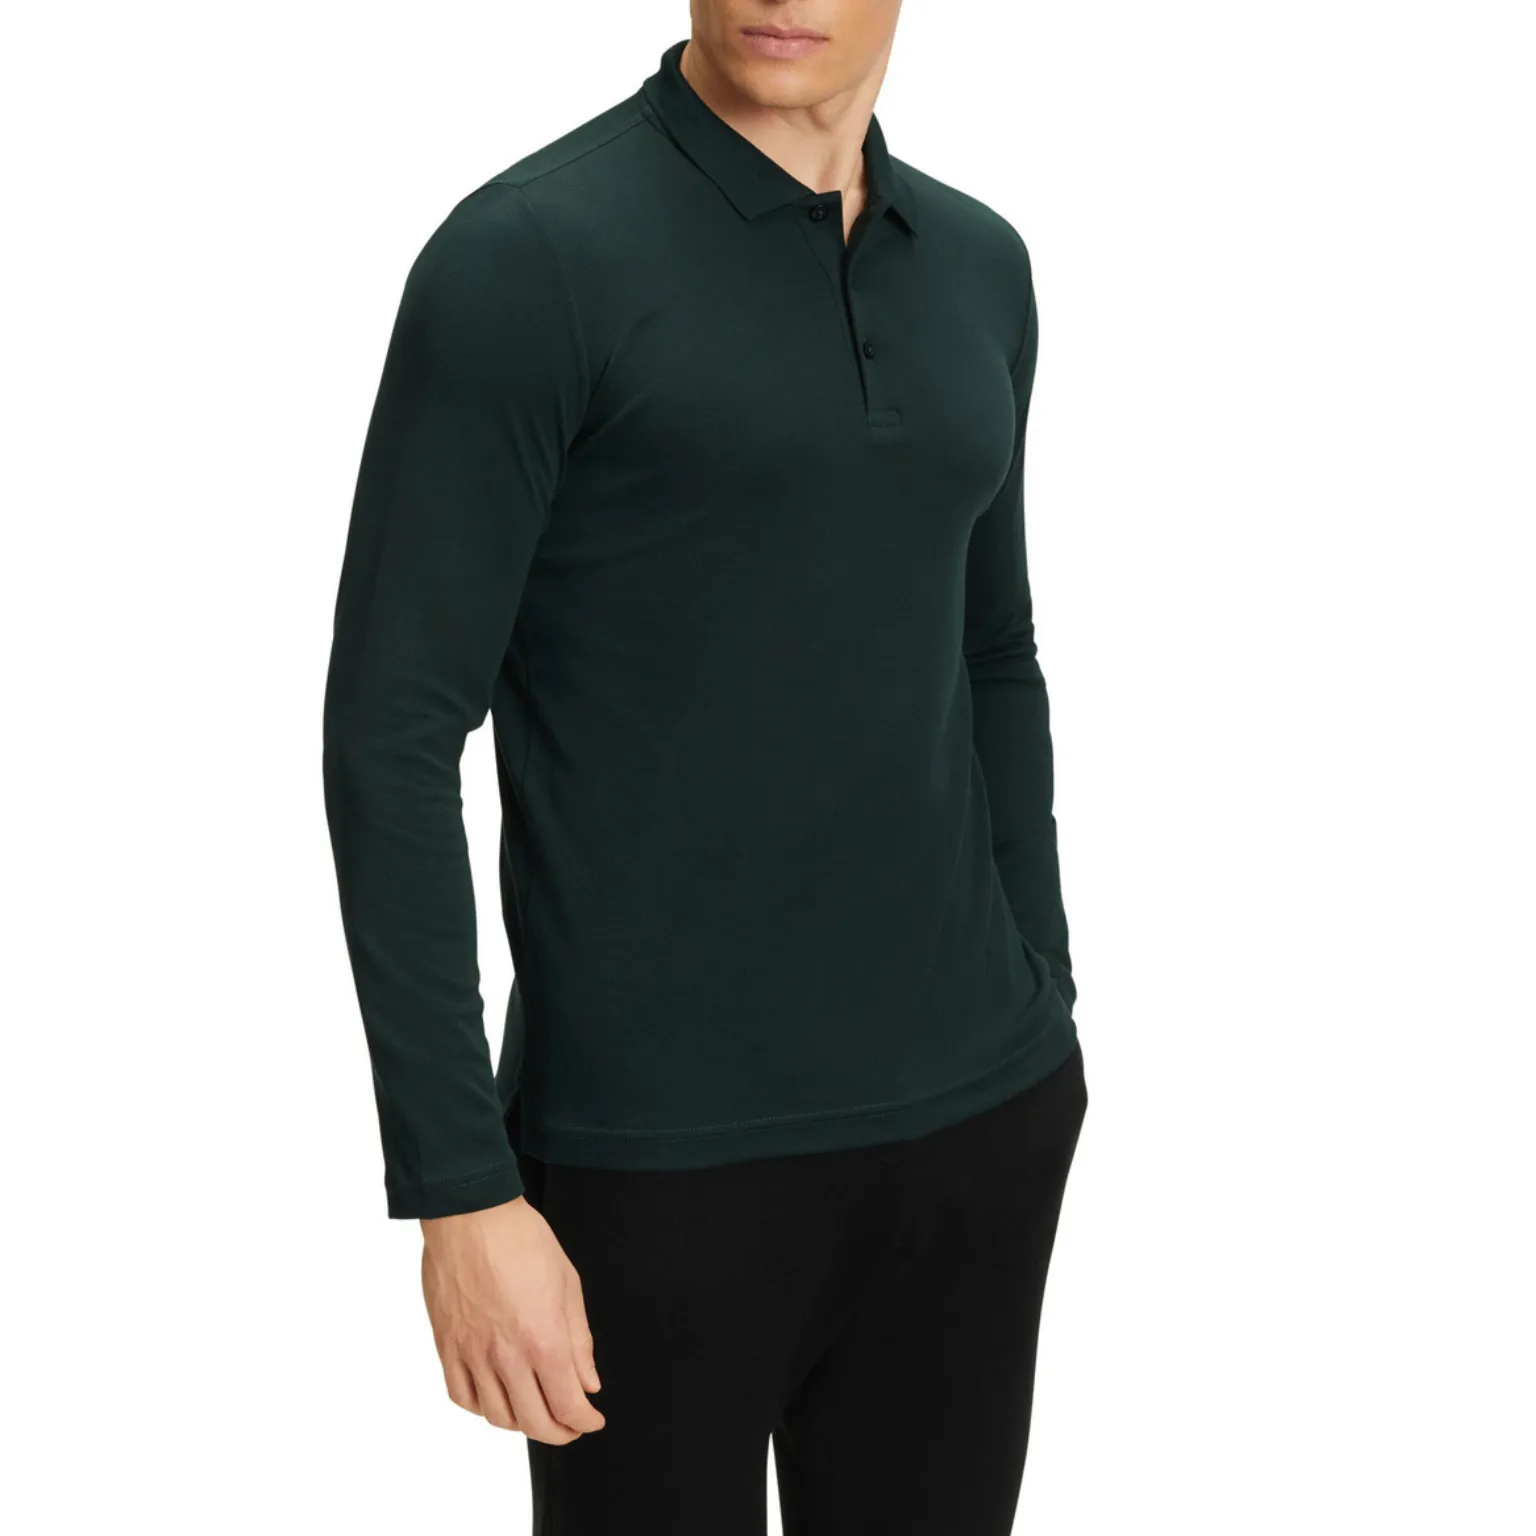 Long Sleeve Polo Shirts manufacturing with trendy design